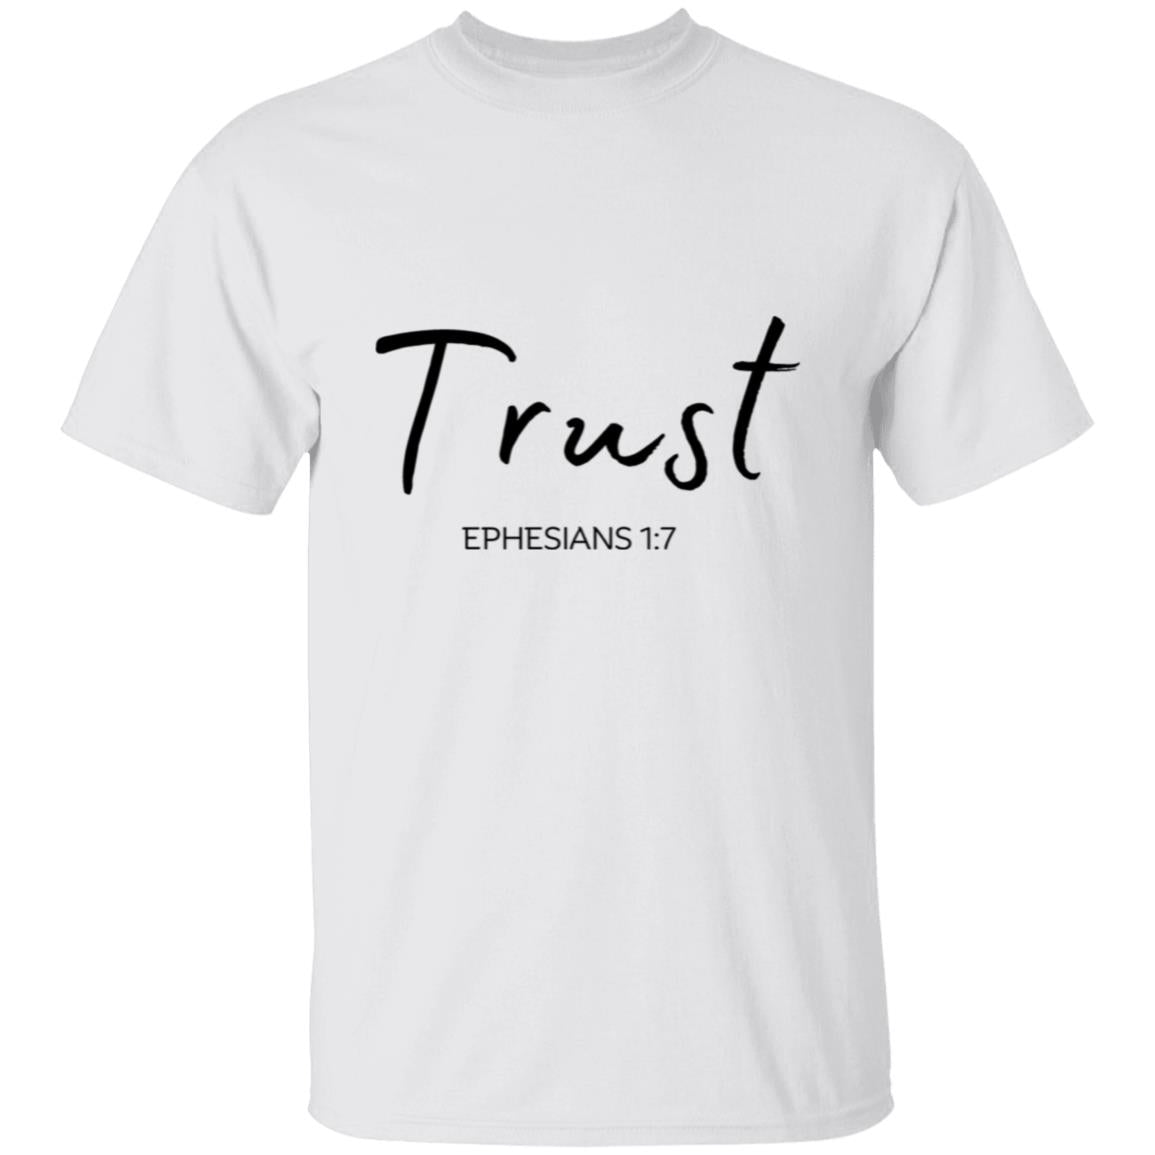 Get trendy with Trust (4) Trust T-Shirt - T-Shirts available at Good Gift Company. Grab yours for $21.95 today!